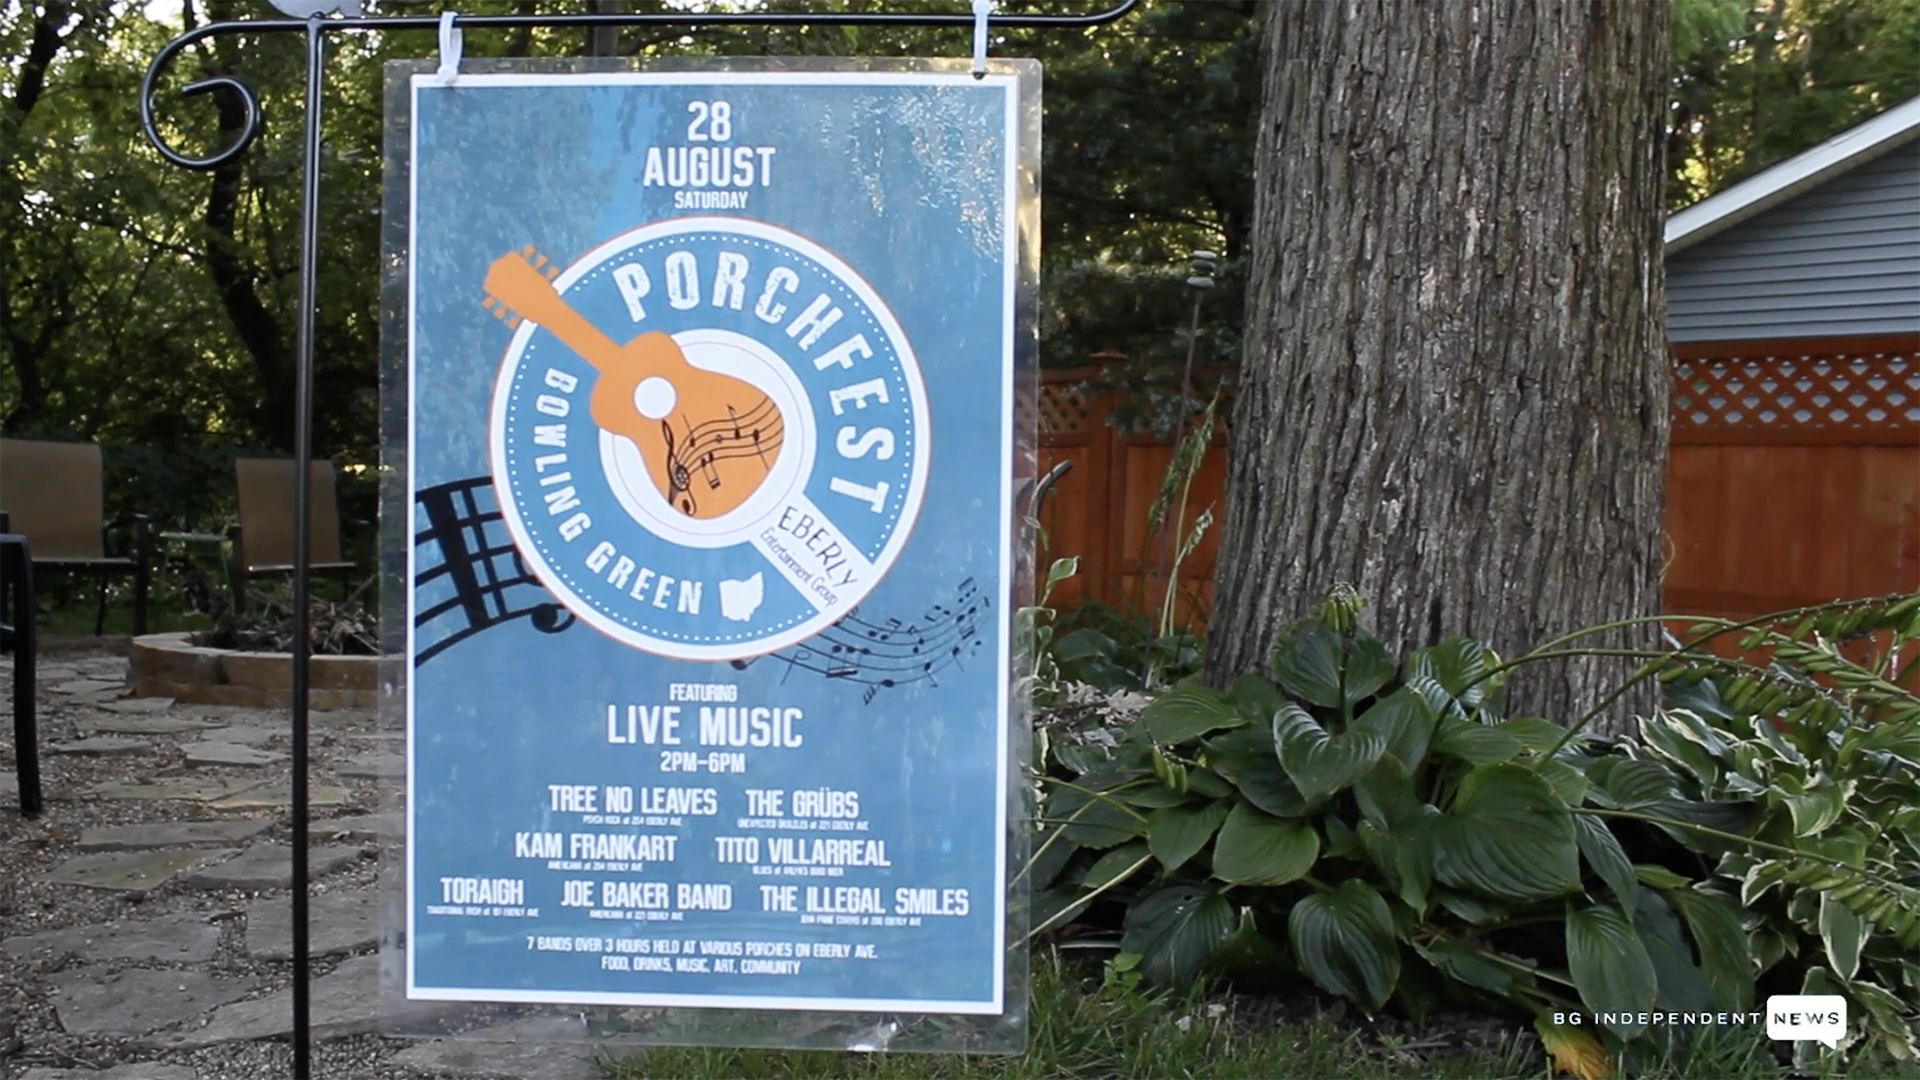 Porch Fest features day’s worth of local music [VIDEO] BG Independent